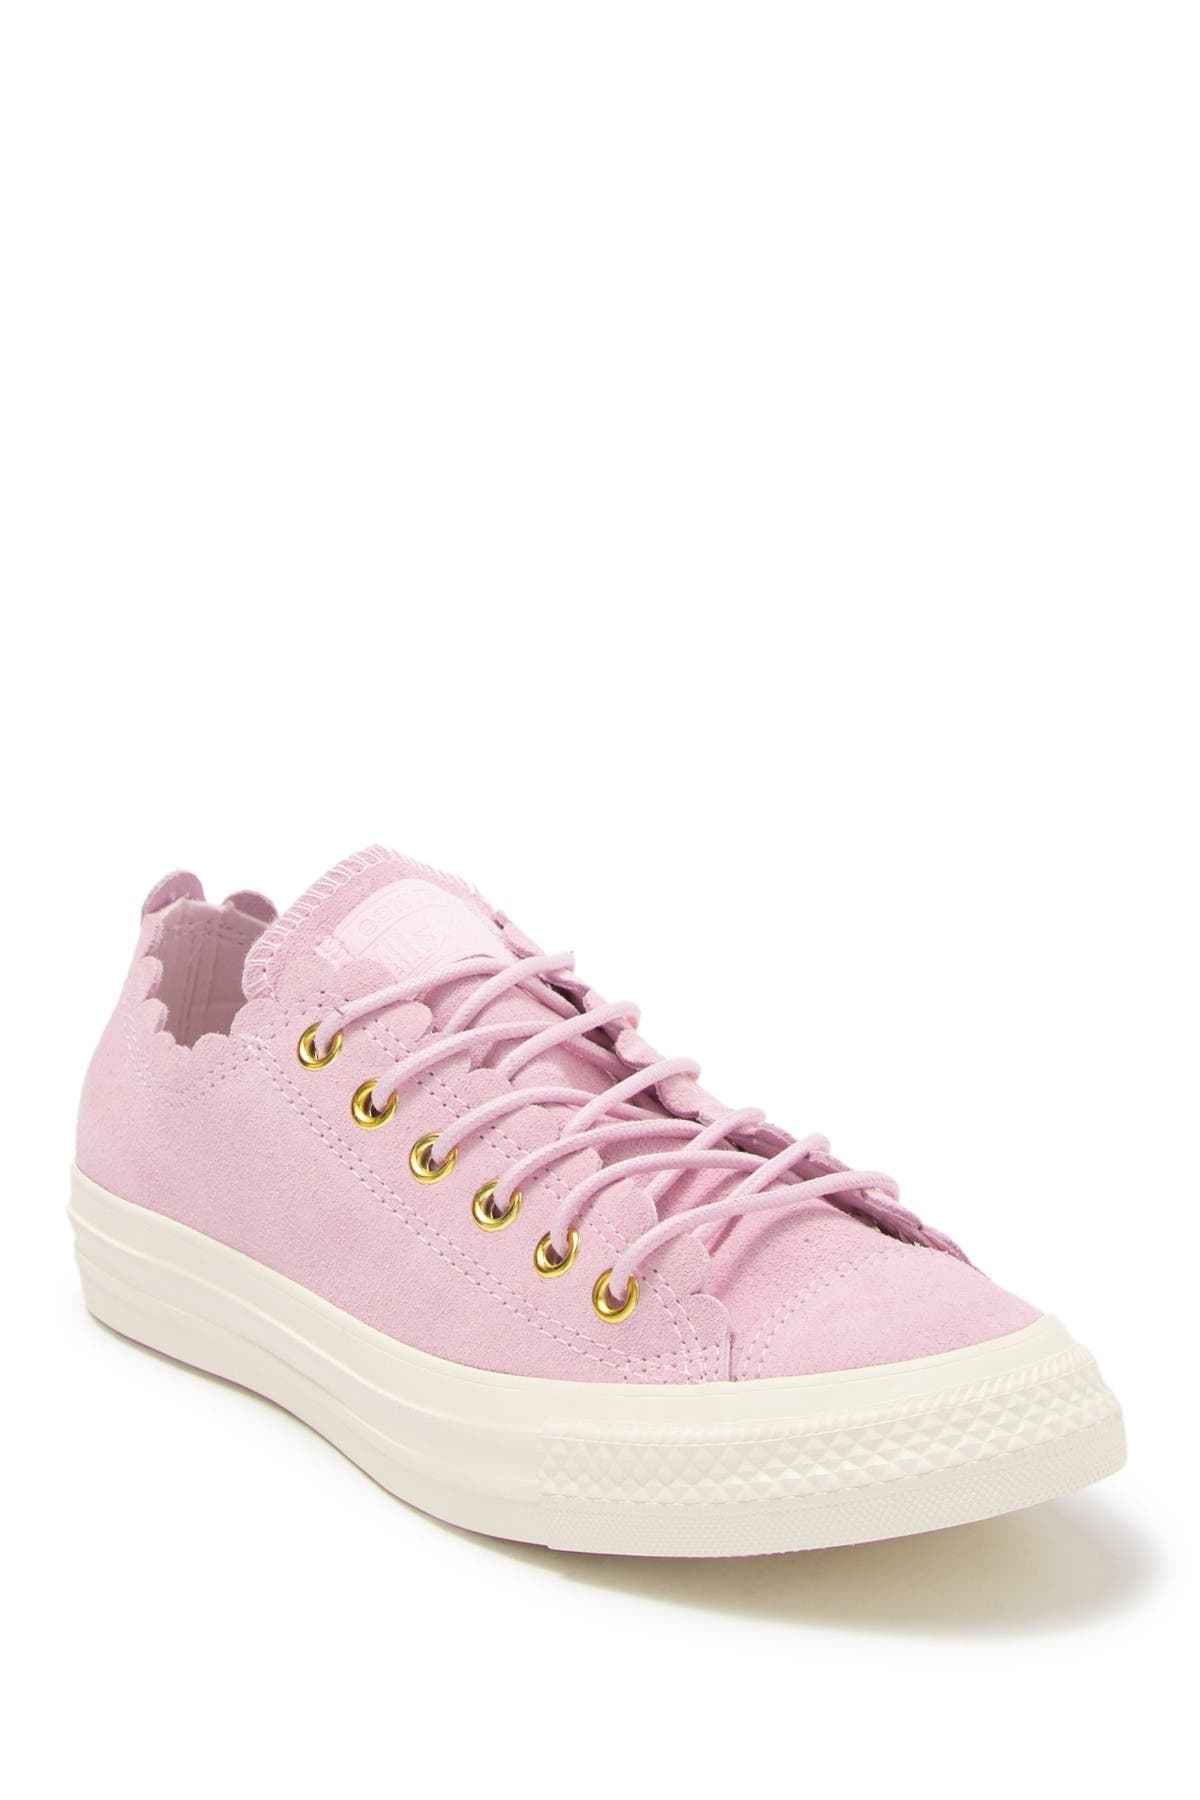 converse chuck taylor all star frilly thrills